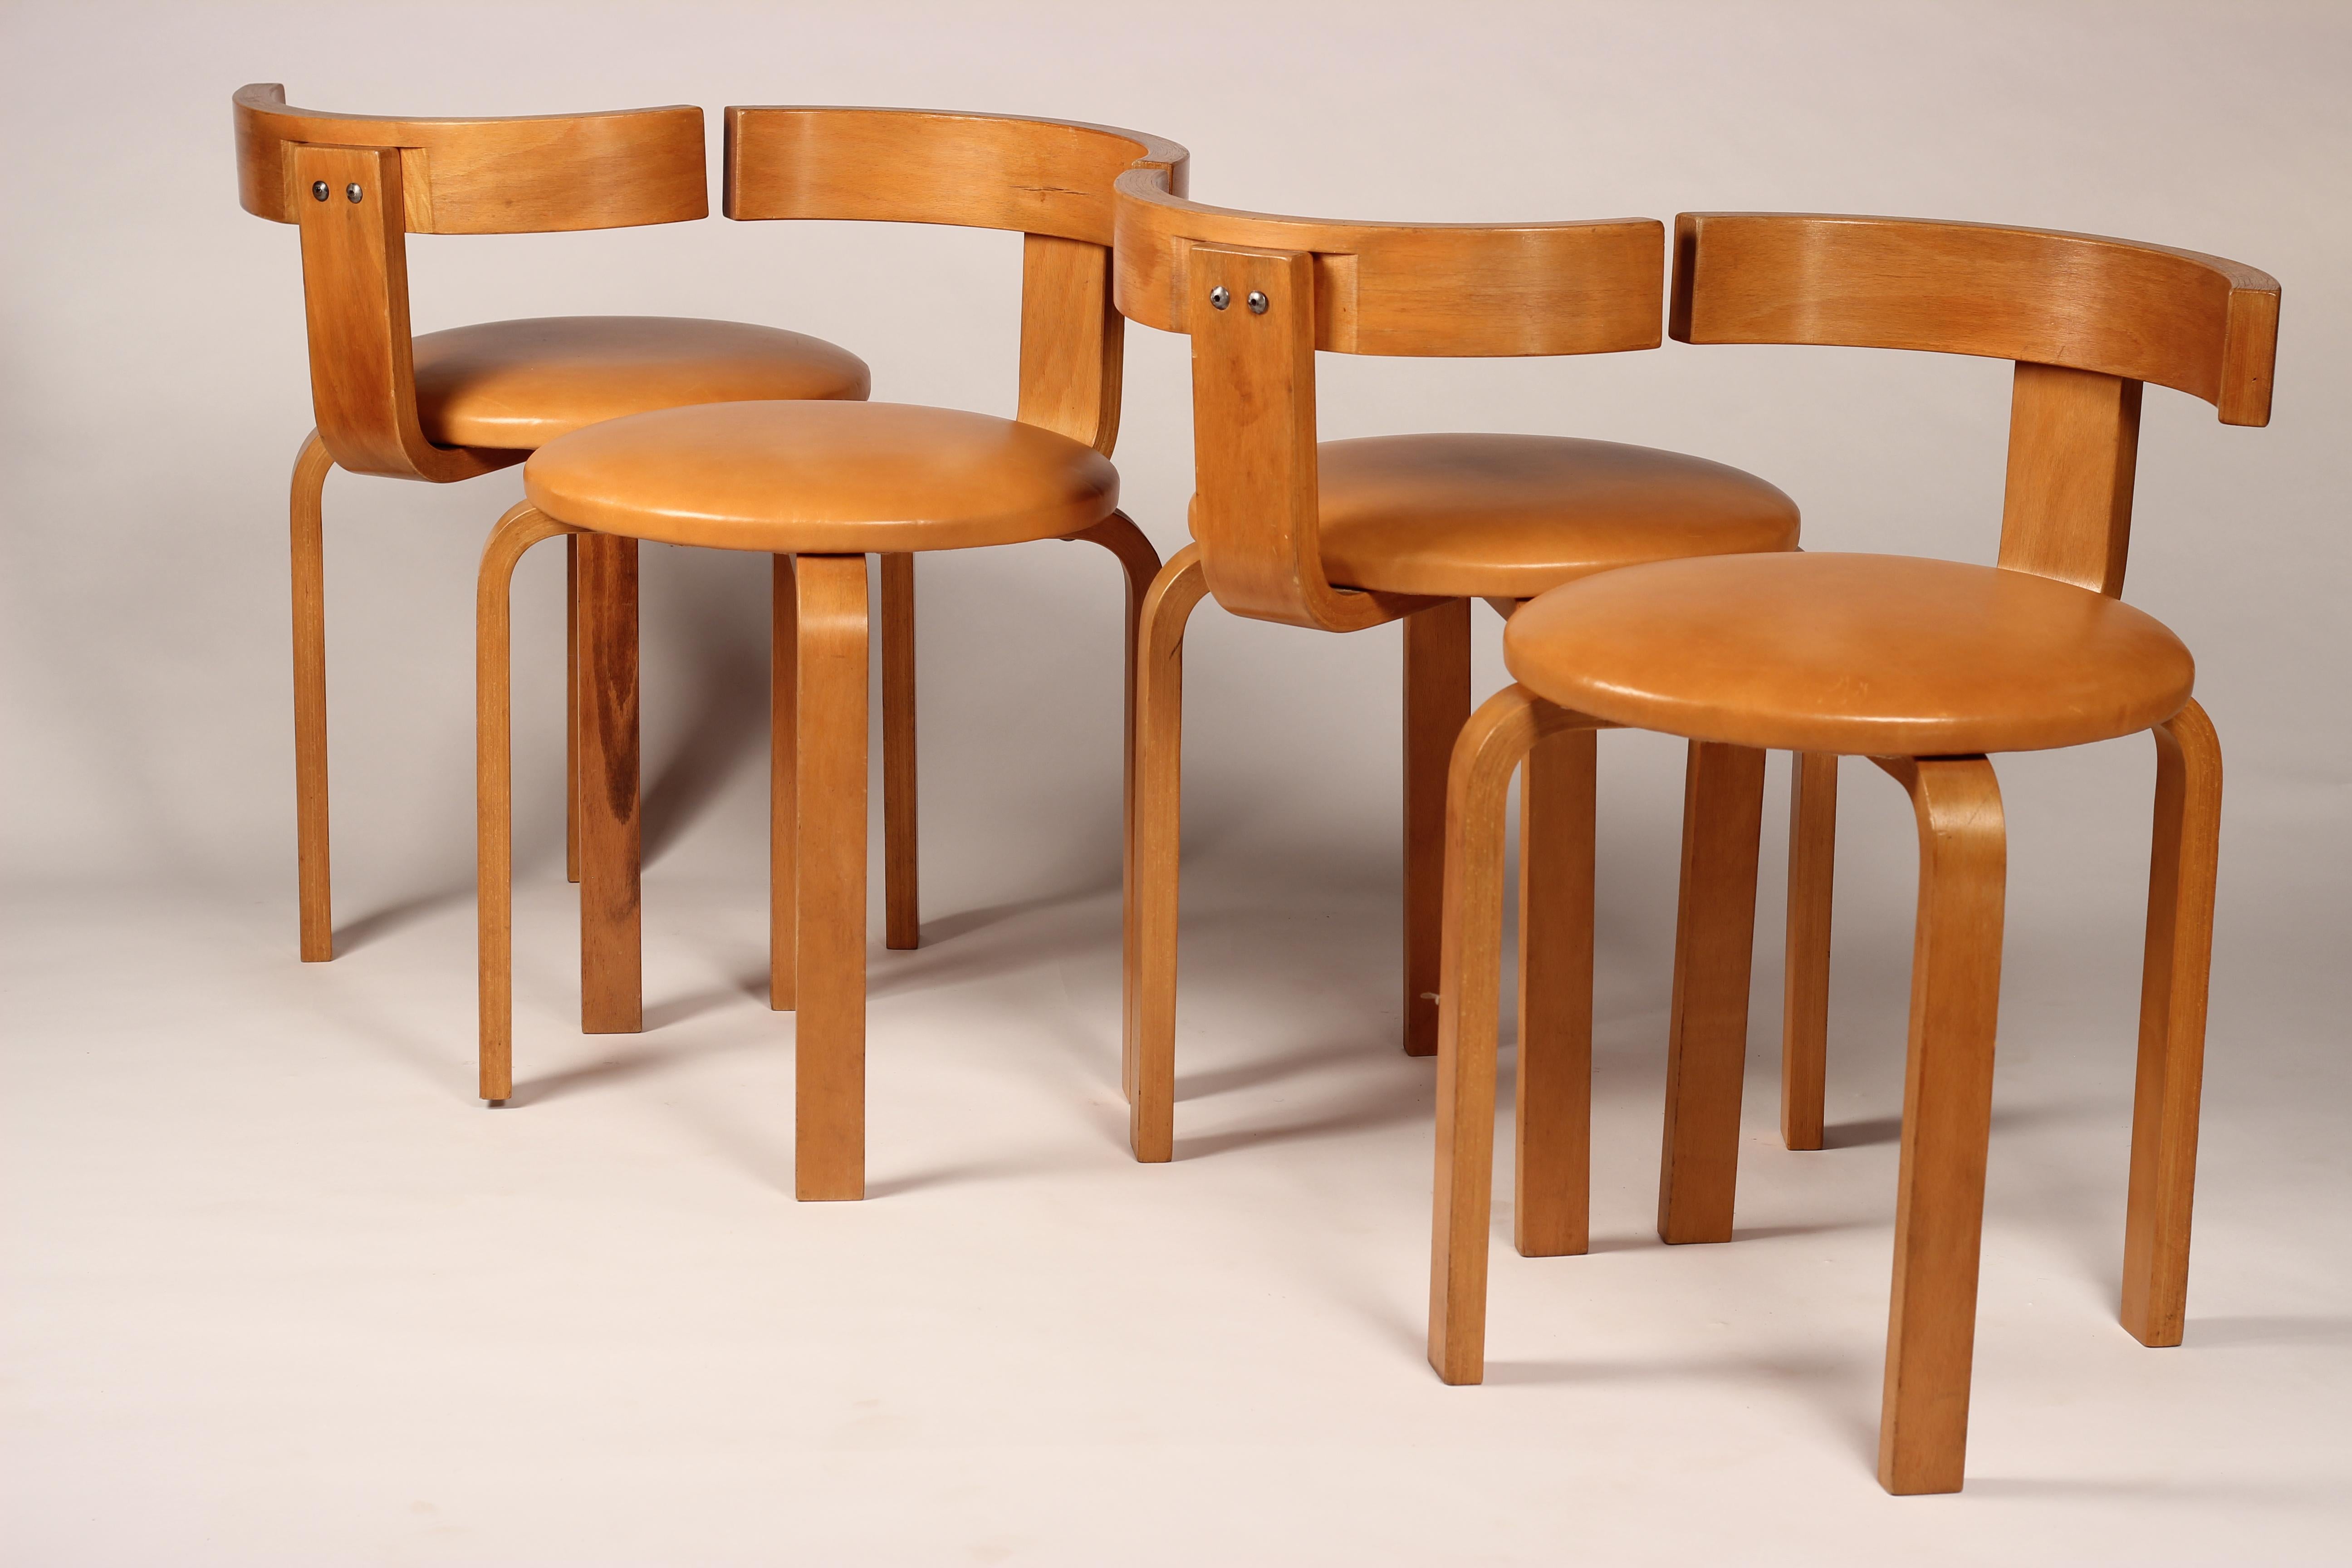 A set of 4 Mobelfabrik Danish Chairs or steam bent stools by Georg Petersens. The backs that can either be retained or removed to form stools that are very similar in style to Alvar Aalto’s. The frames have been re polished and the seats have been